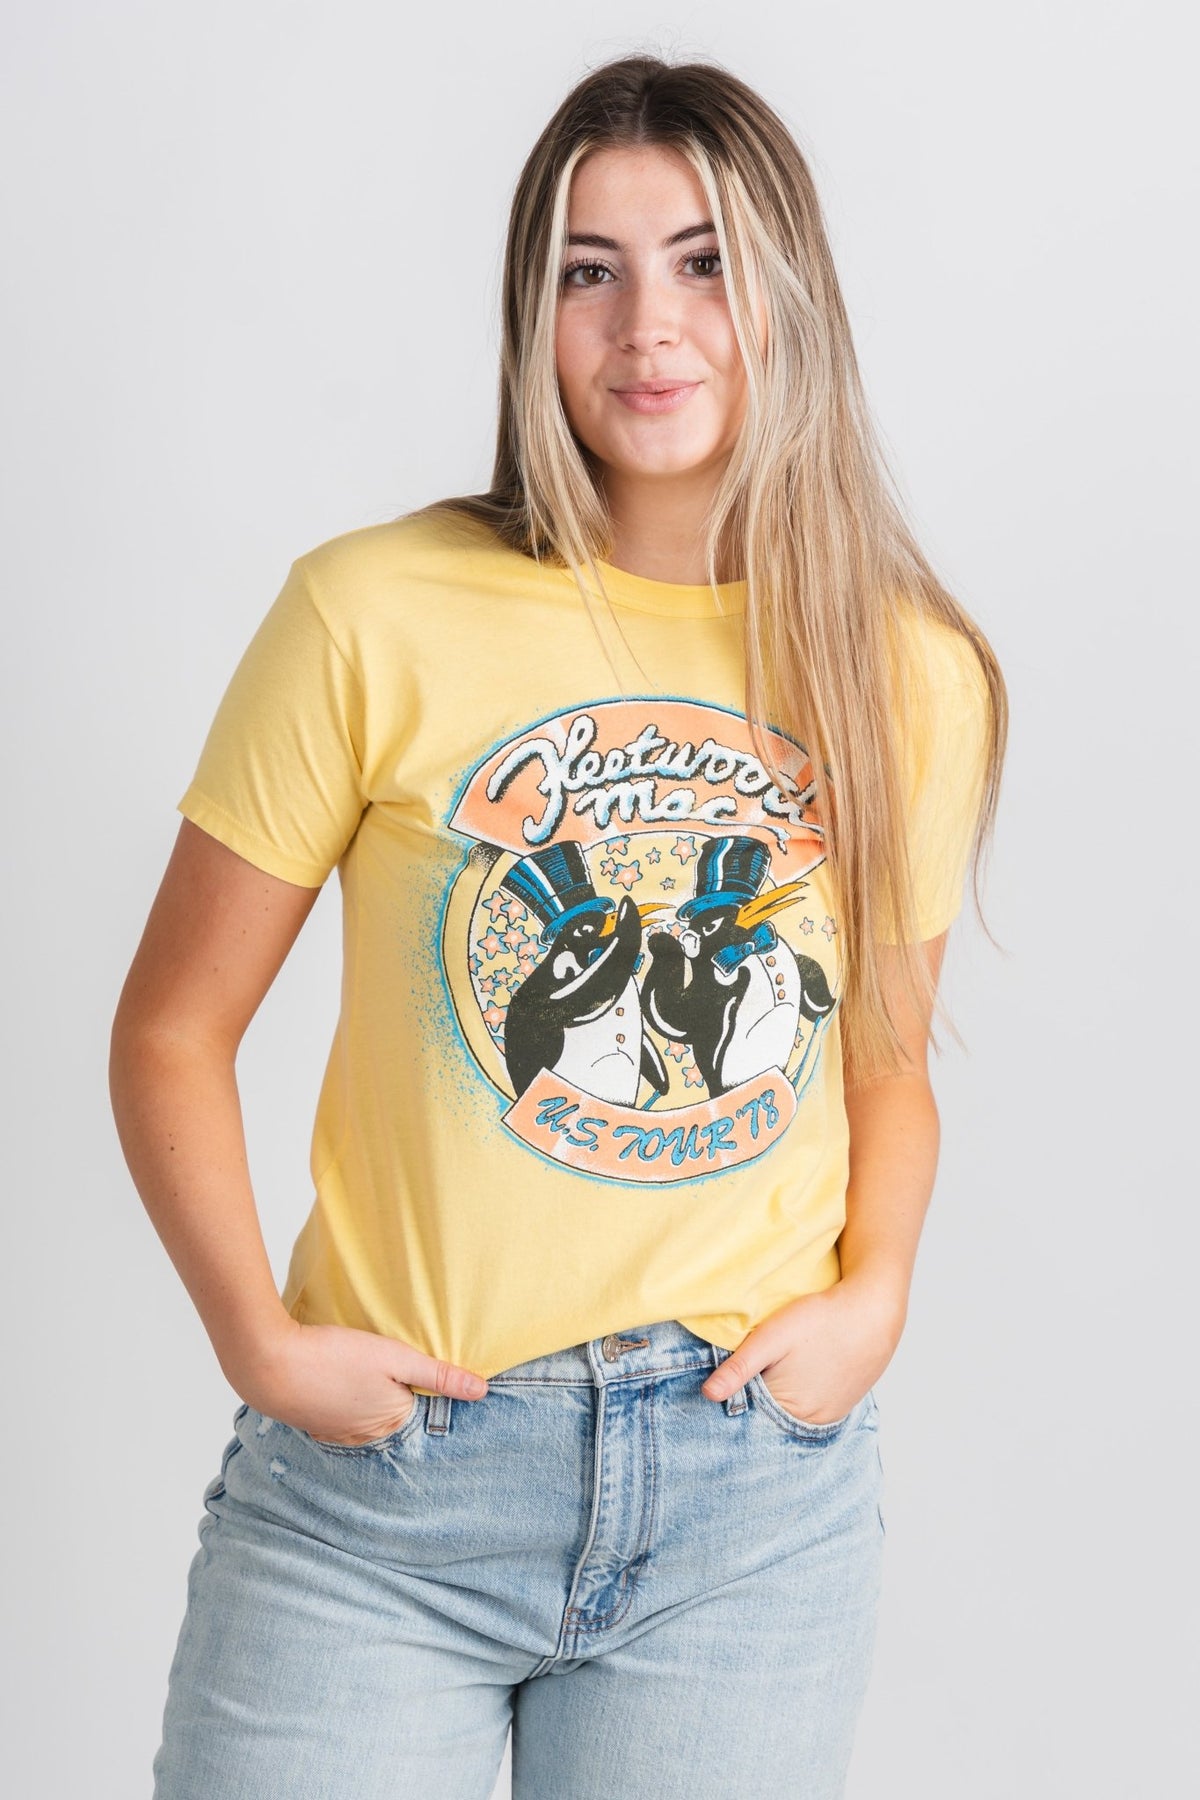 DayDreamer Fleetwood Mac tour 78 ringer t-shirt yellow bloom - DayDreamer Graphic Band Tees at Lush Fashion Lounge Trendy Boutique in Oklahoma City